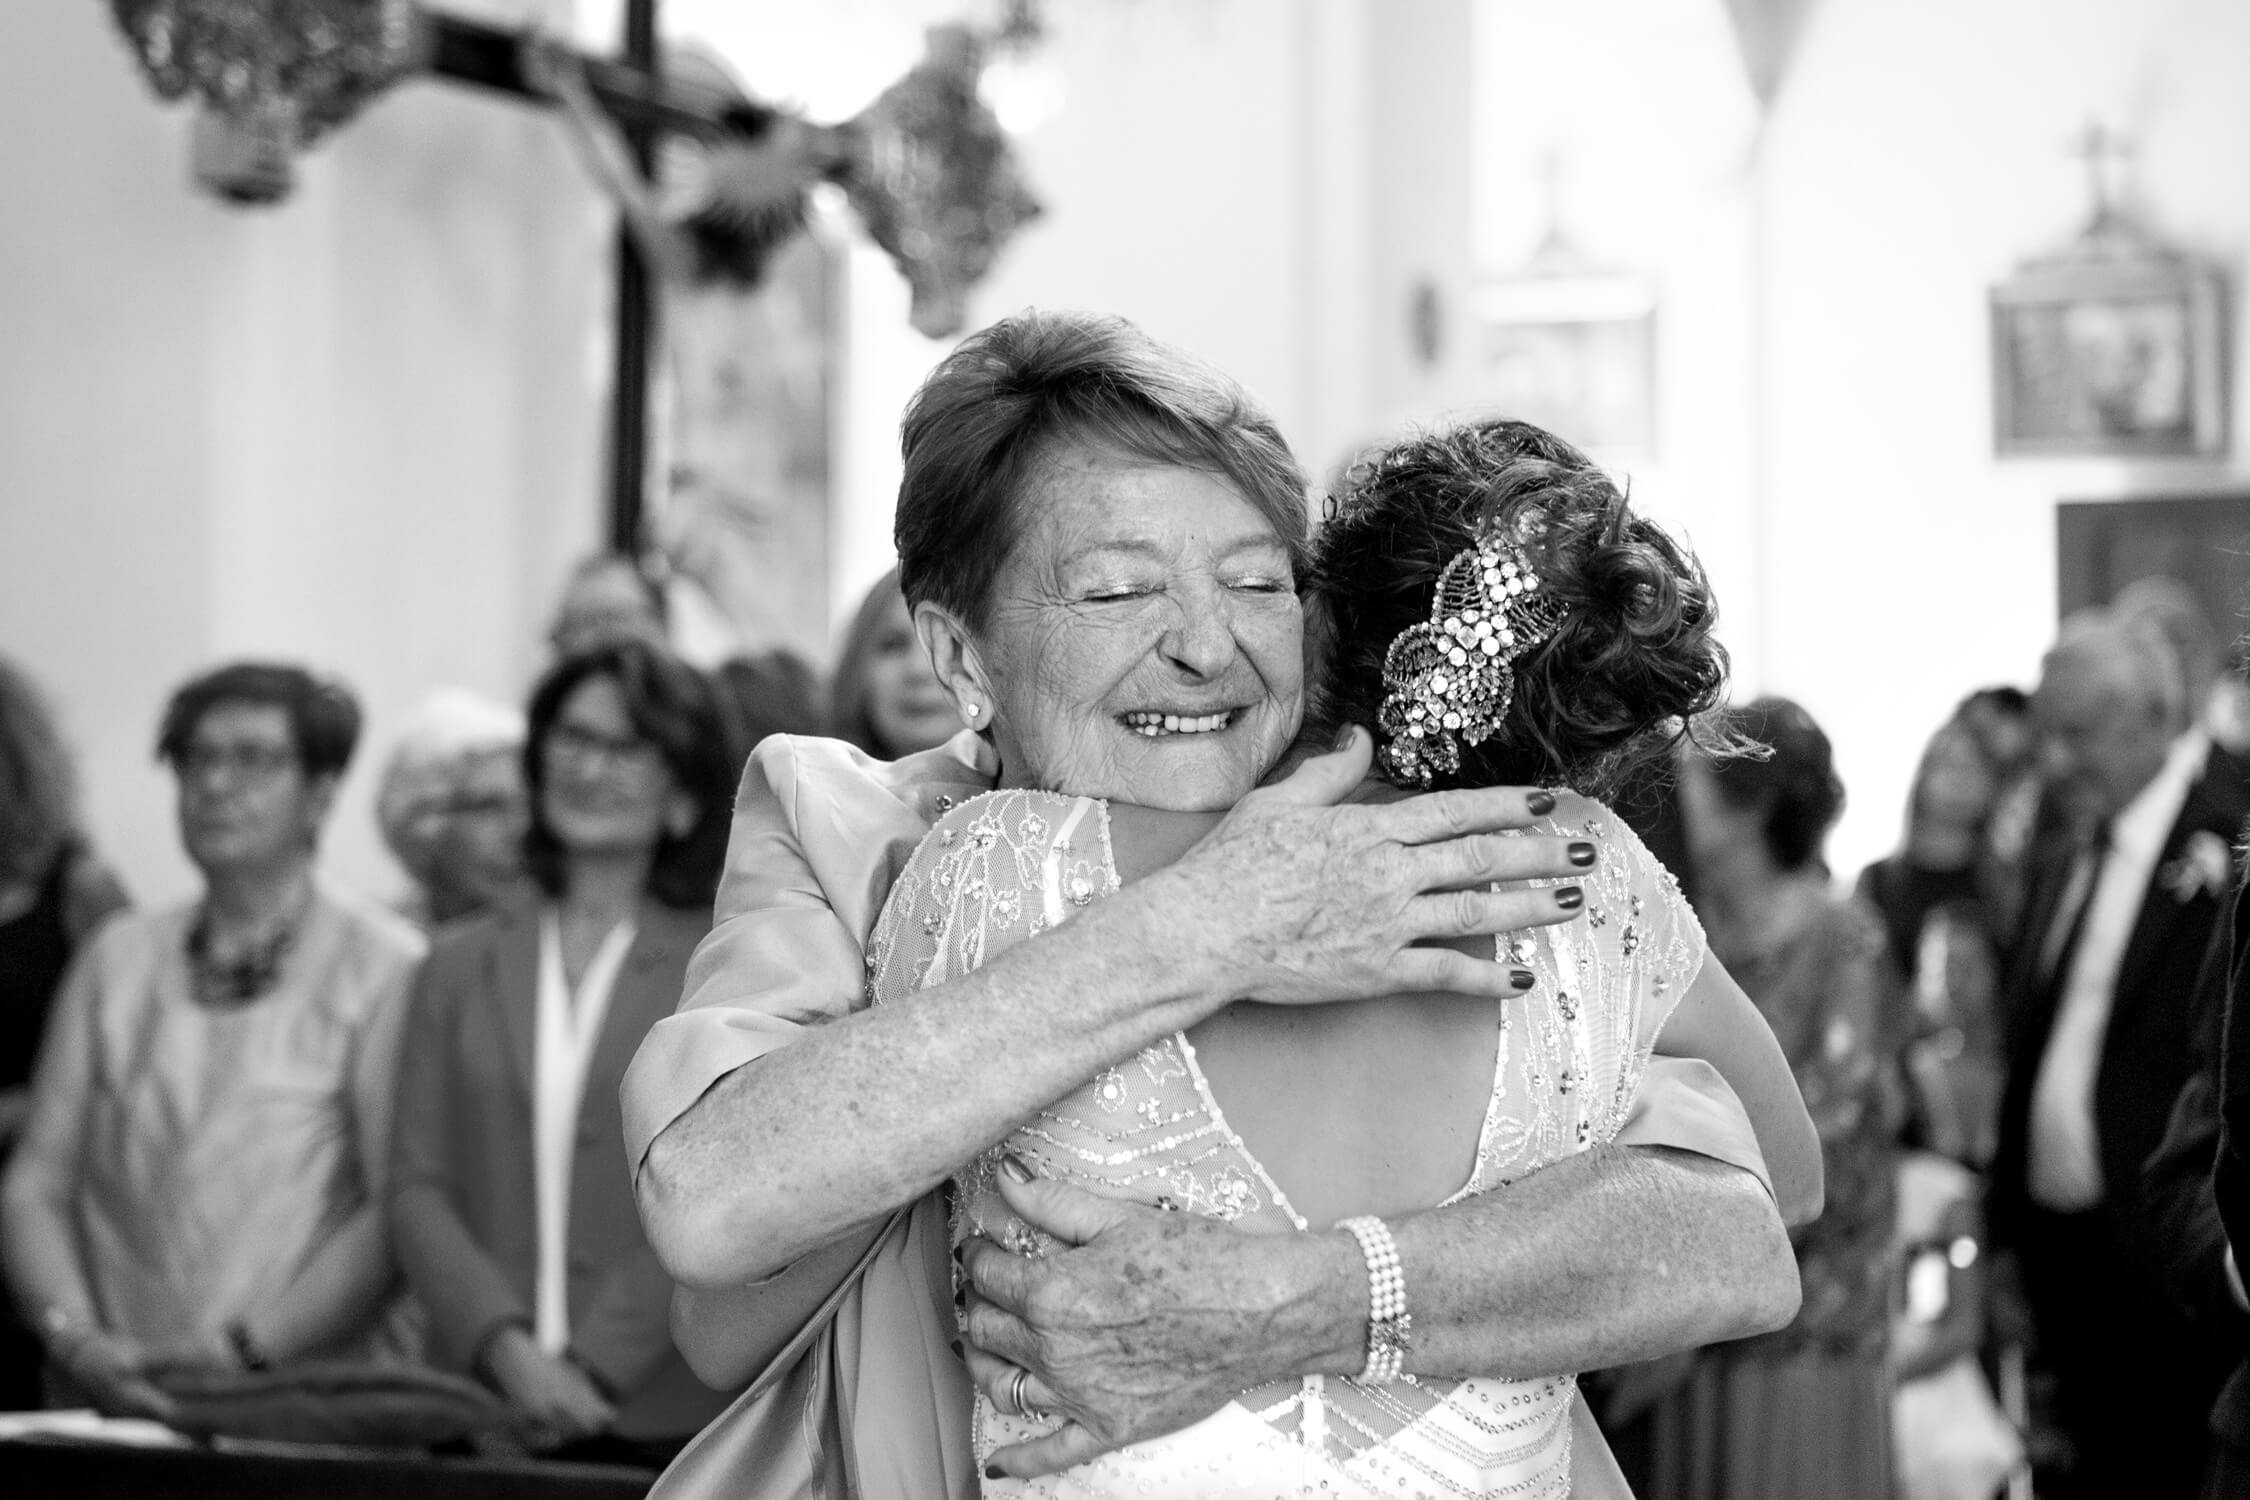 Mom of the husband hugging the bride after the ceremony at their wedding